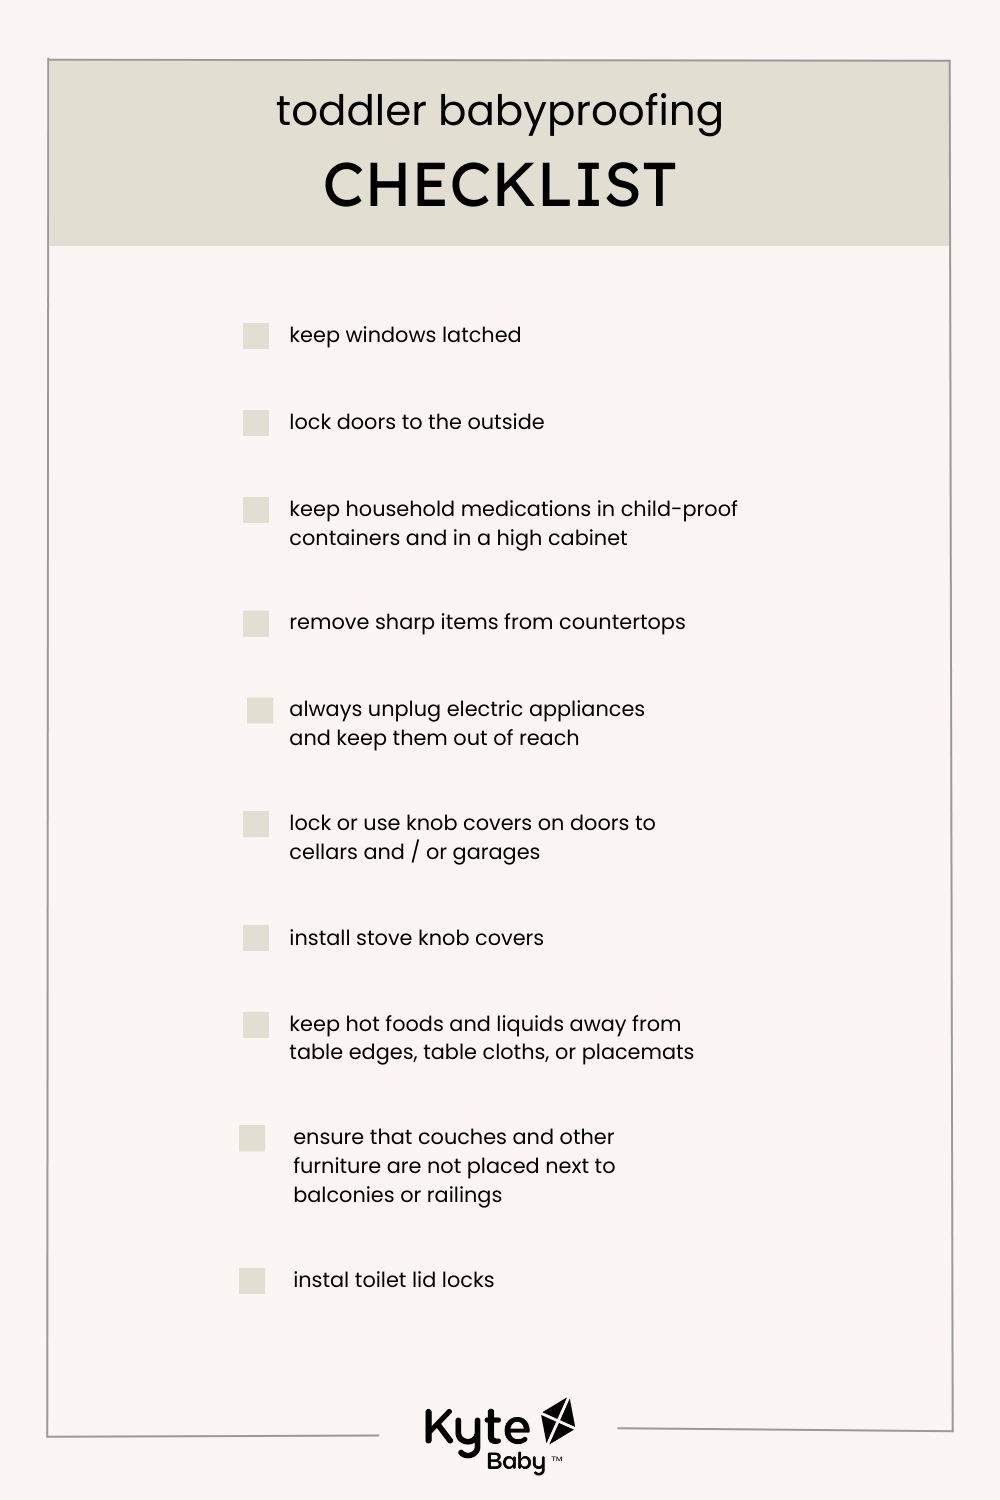 Kyte Baby Toddler Babyproofing Checklist